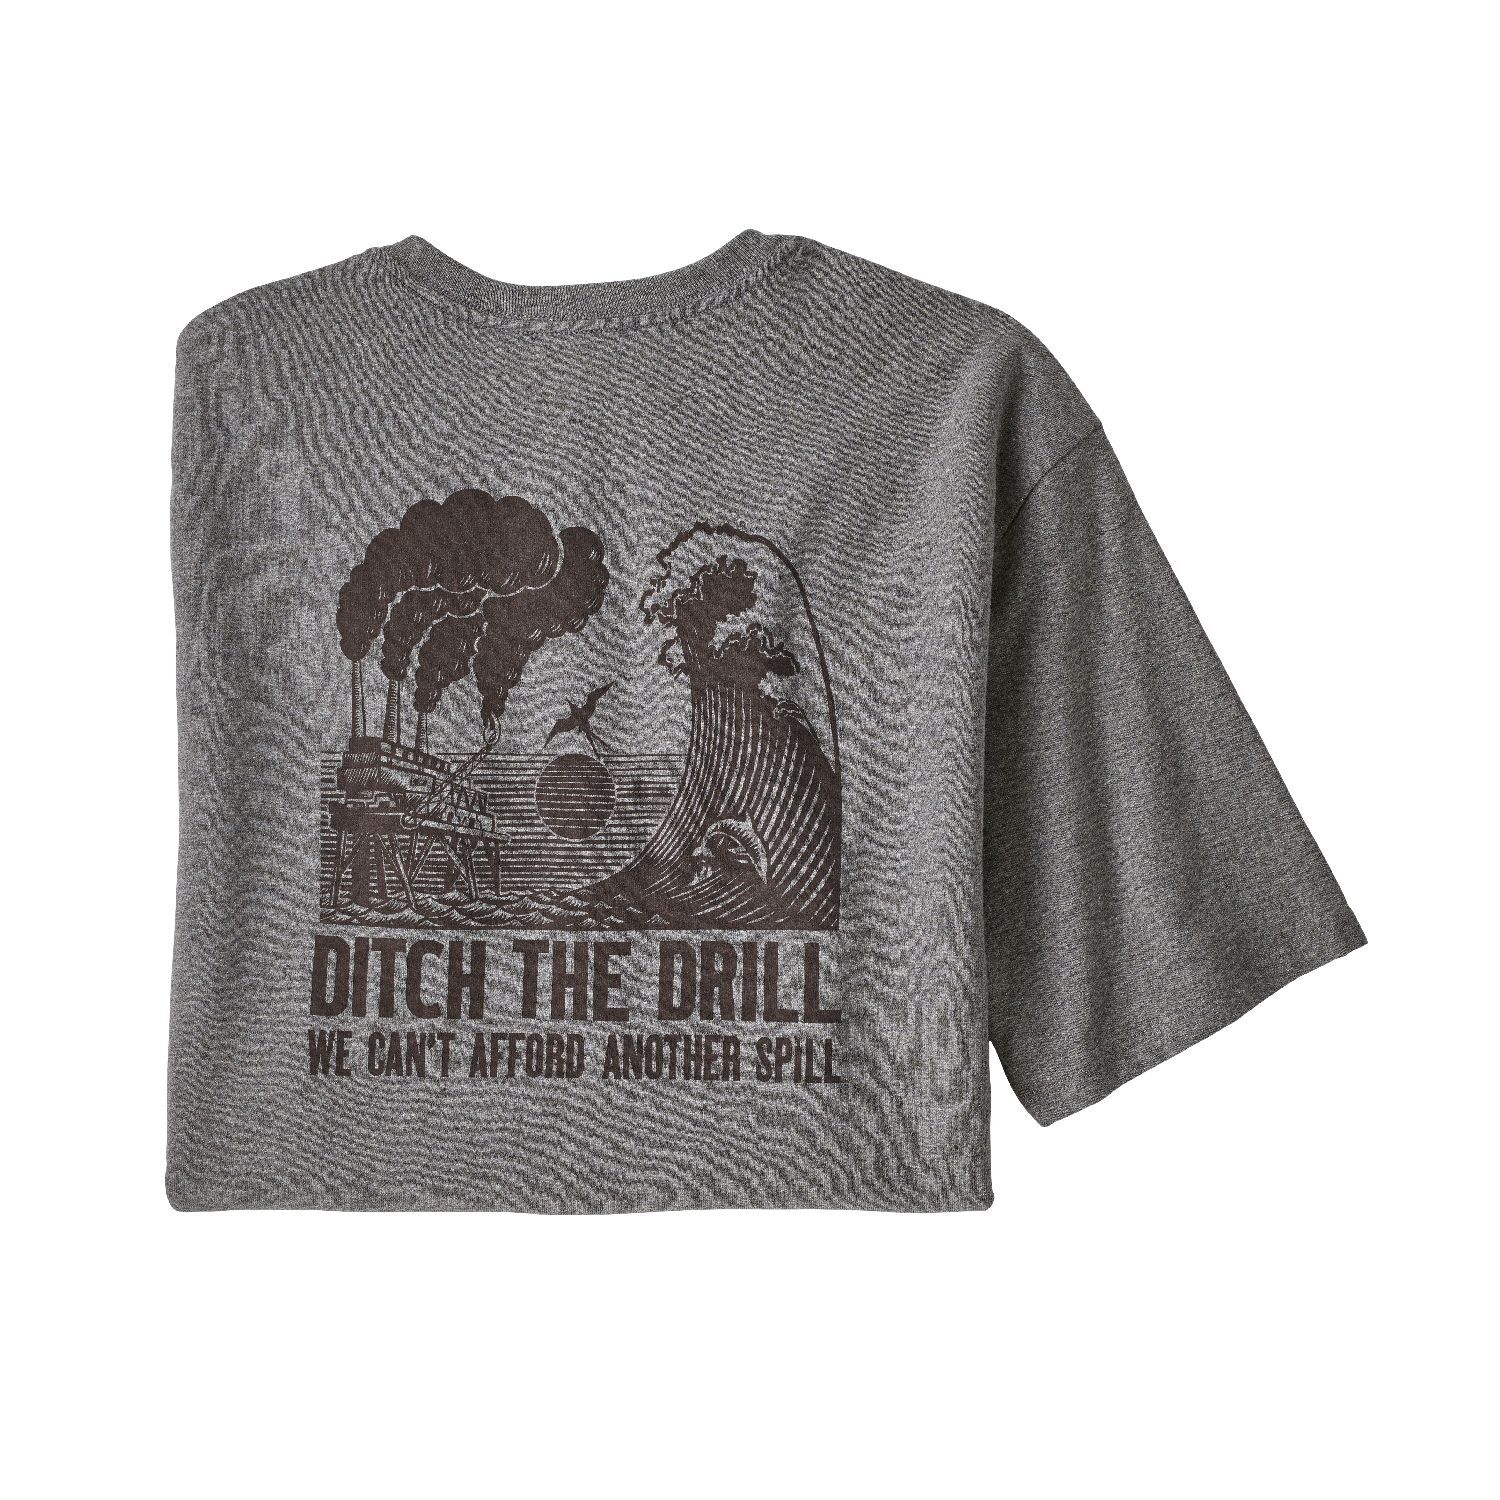 Patagonia Ditch The Drill Responsibili-Tee - T-shirt homme | Hardloop